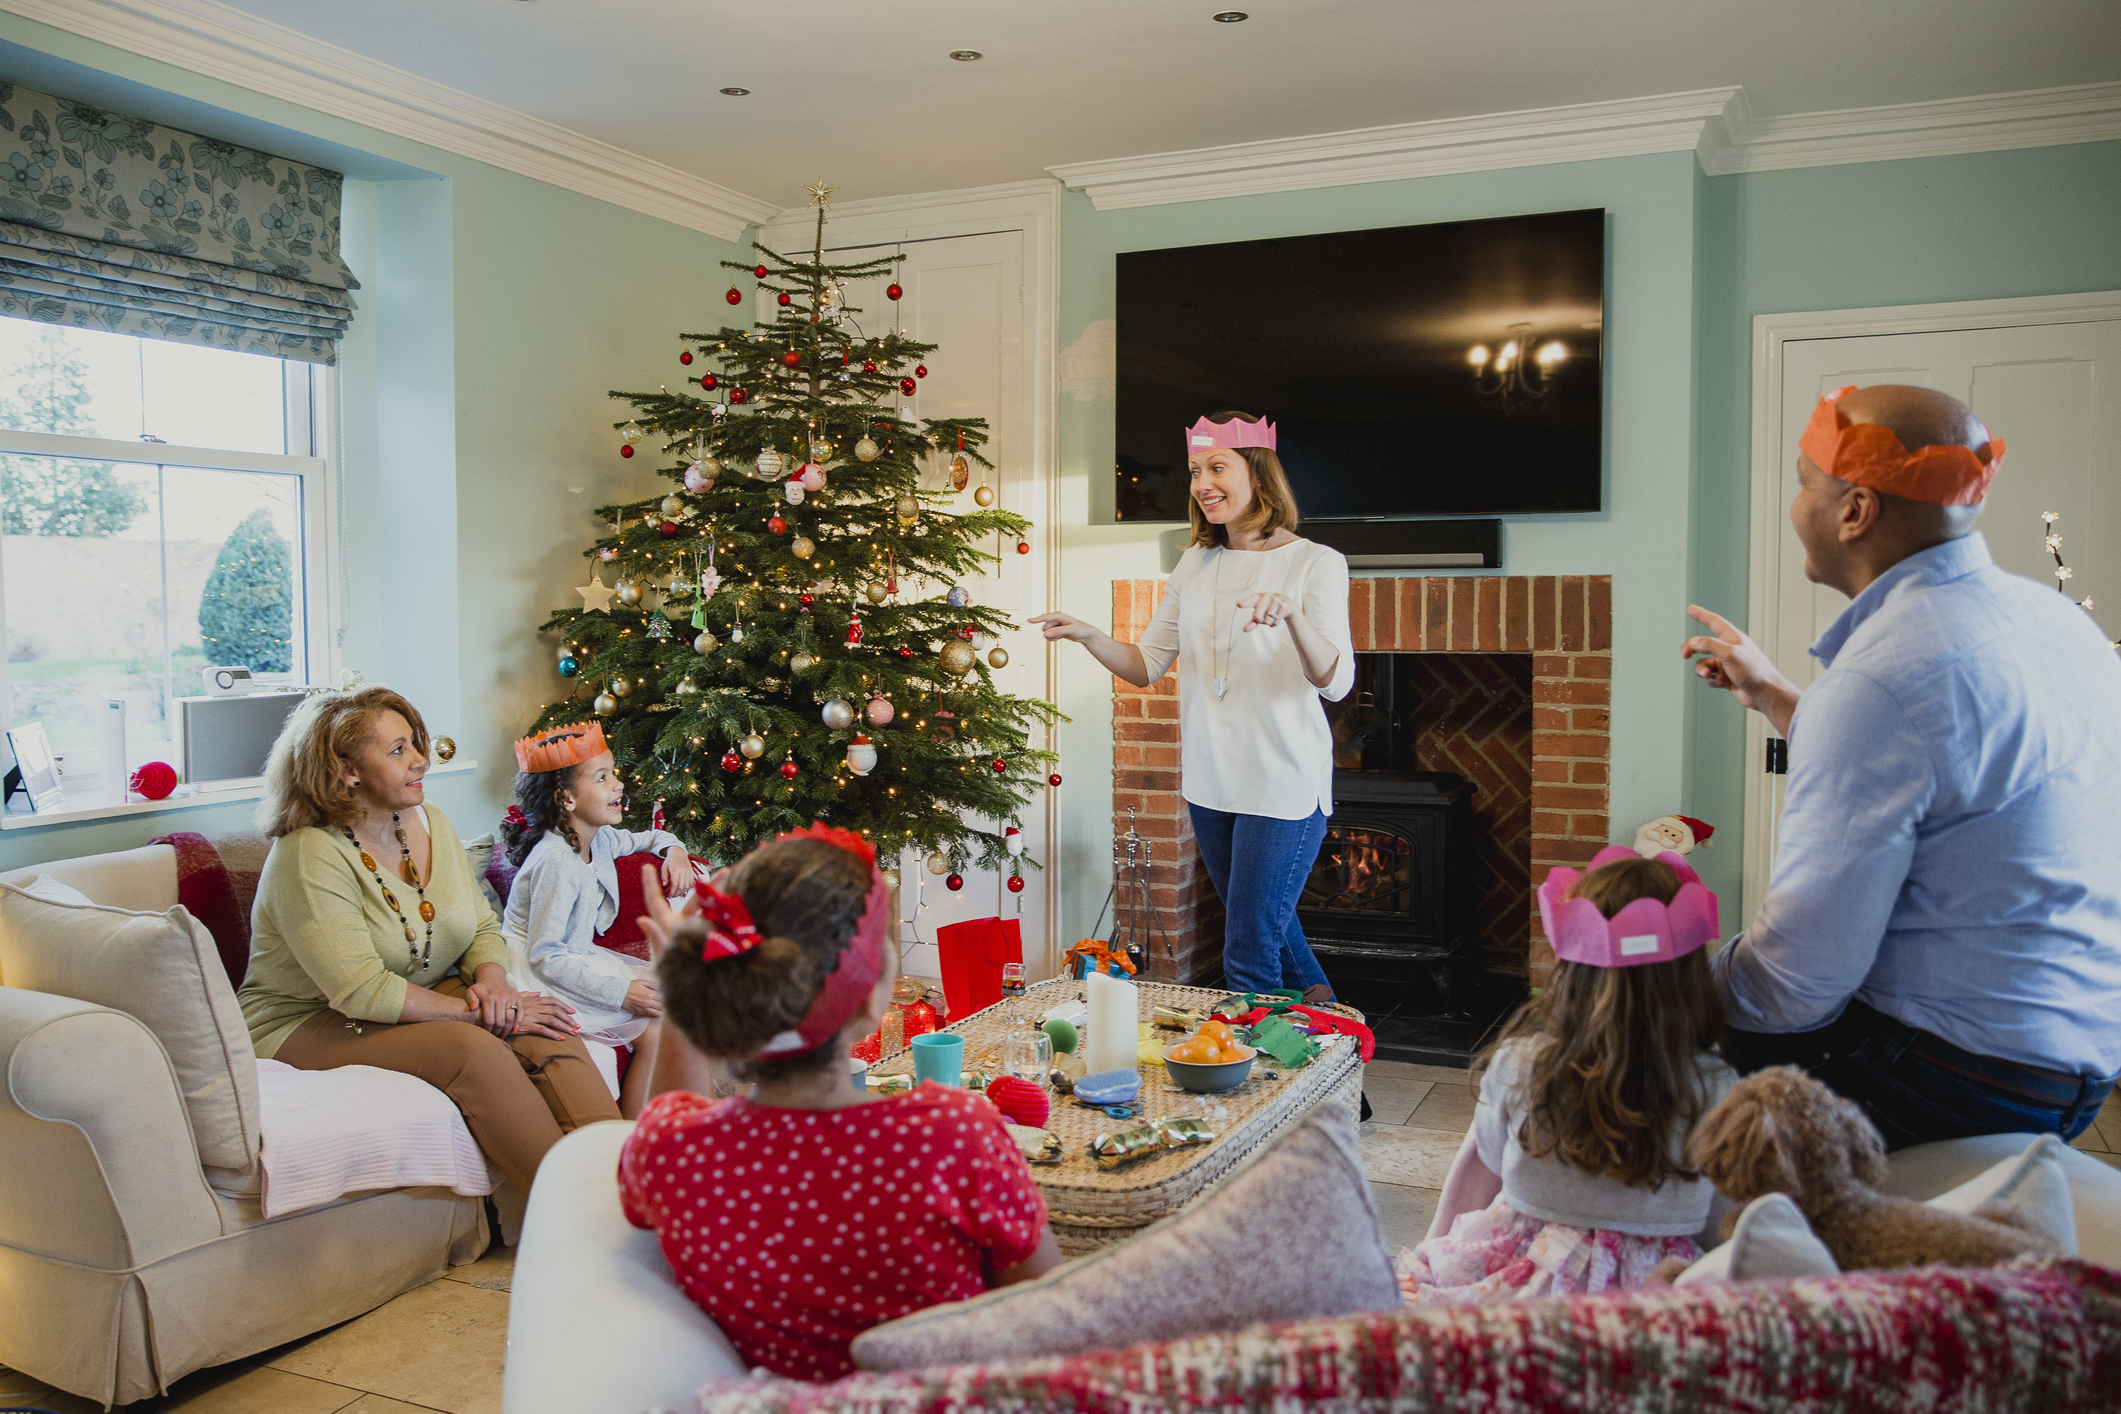 5 Ideas to Keep the Kids entertained Over the Holidays